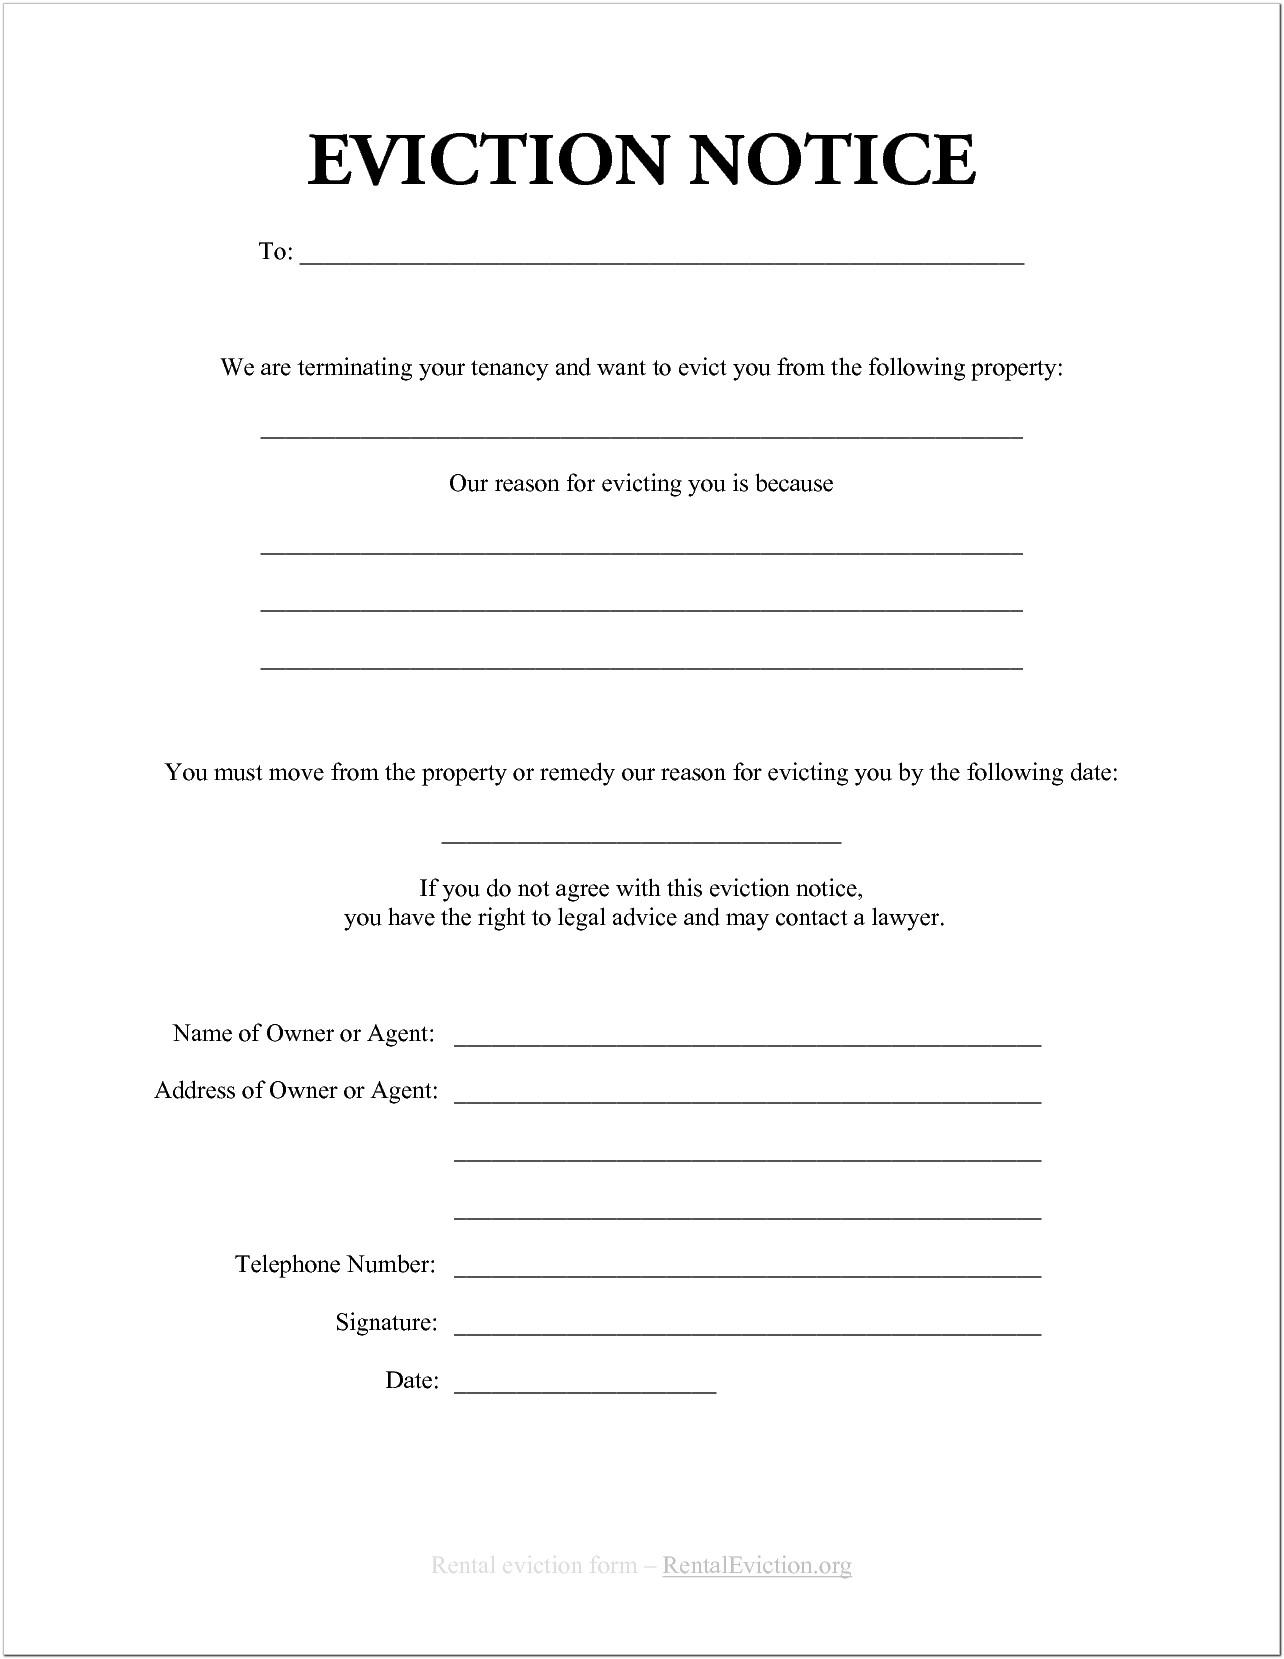 30 Day Eviction Notice Template Alberta